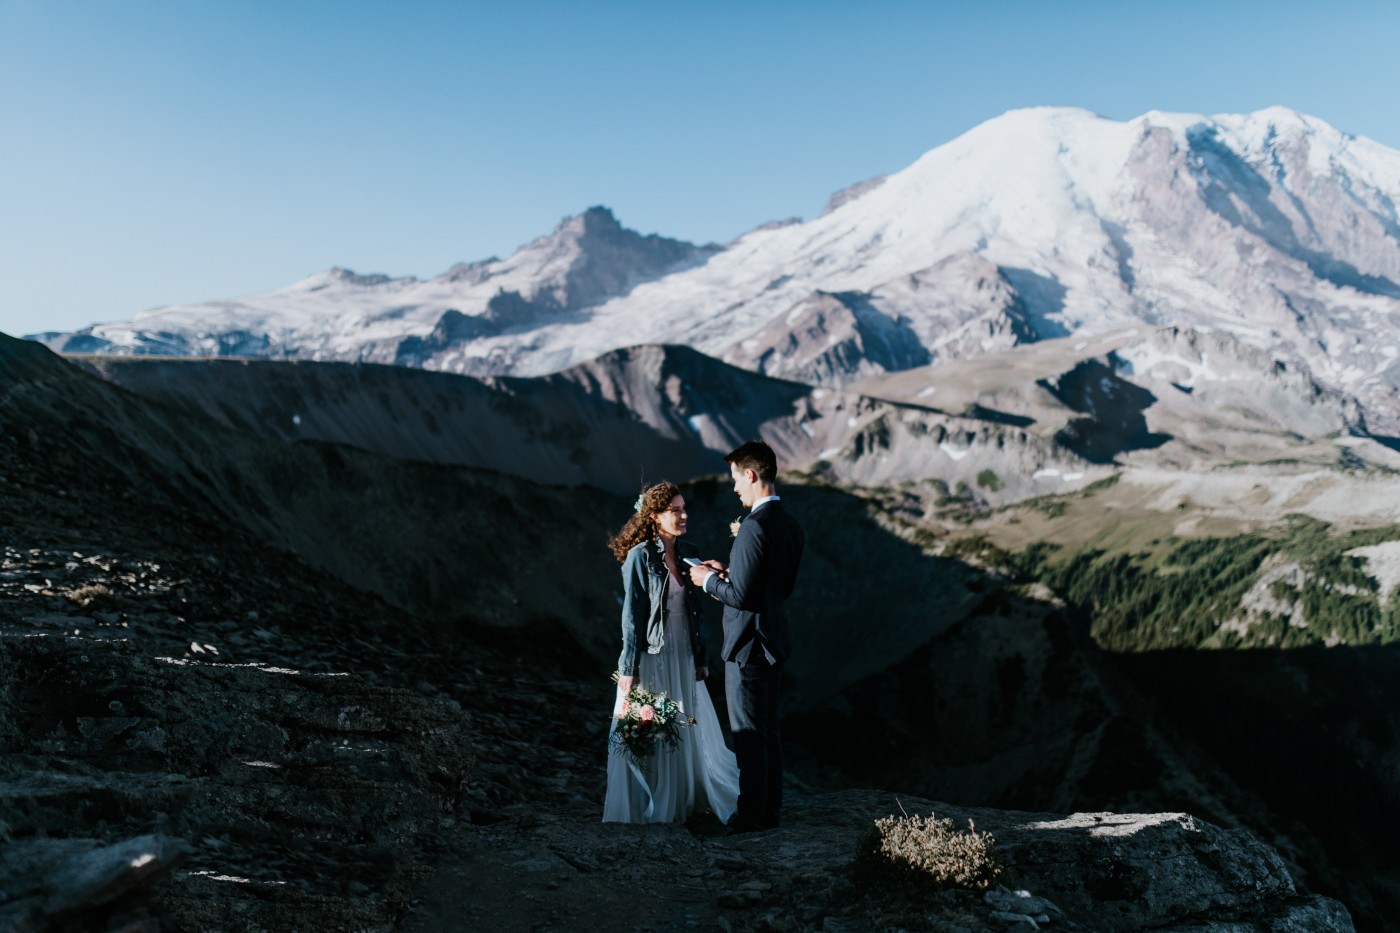 Tash and Chad standing with the mountain in the background. Elopement photography at Mount Rainier by Sienna Plus Josh.